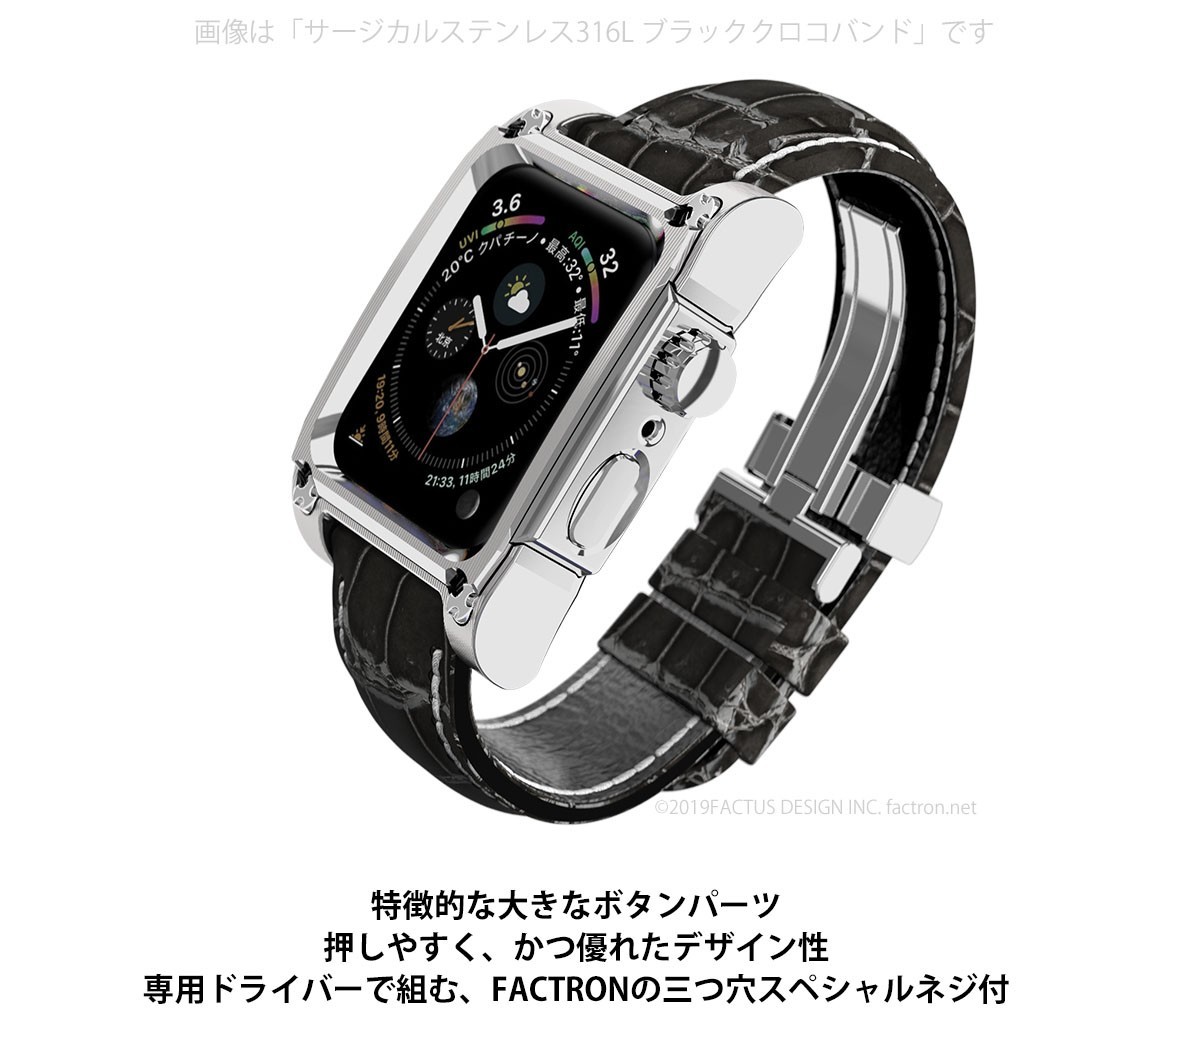  Apple watch 4&amp;5 for Novel for AppleWatch4 surgical stainless steel 316L case black urethane band Series4&amp;5 40mm exclusive use FA-W-027